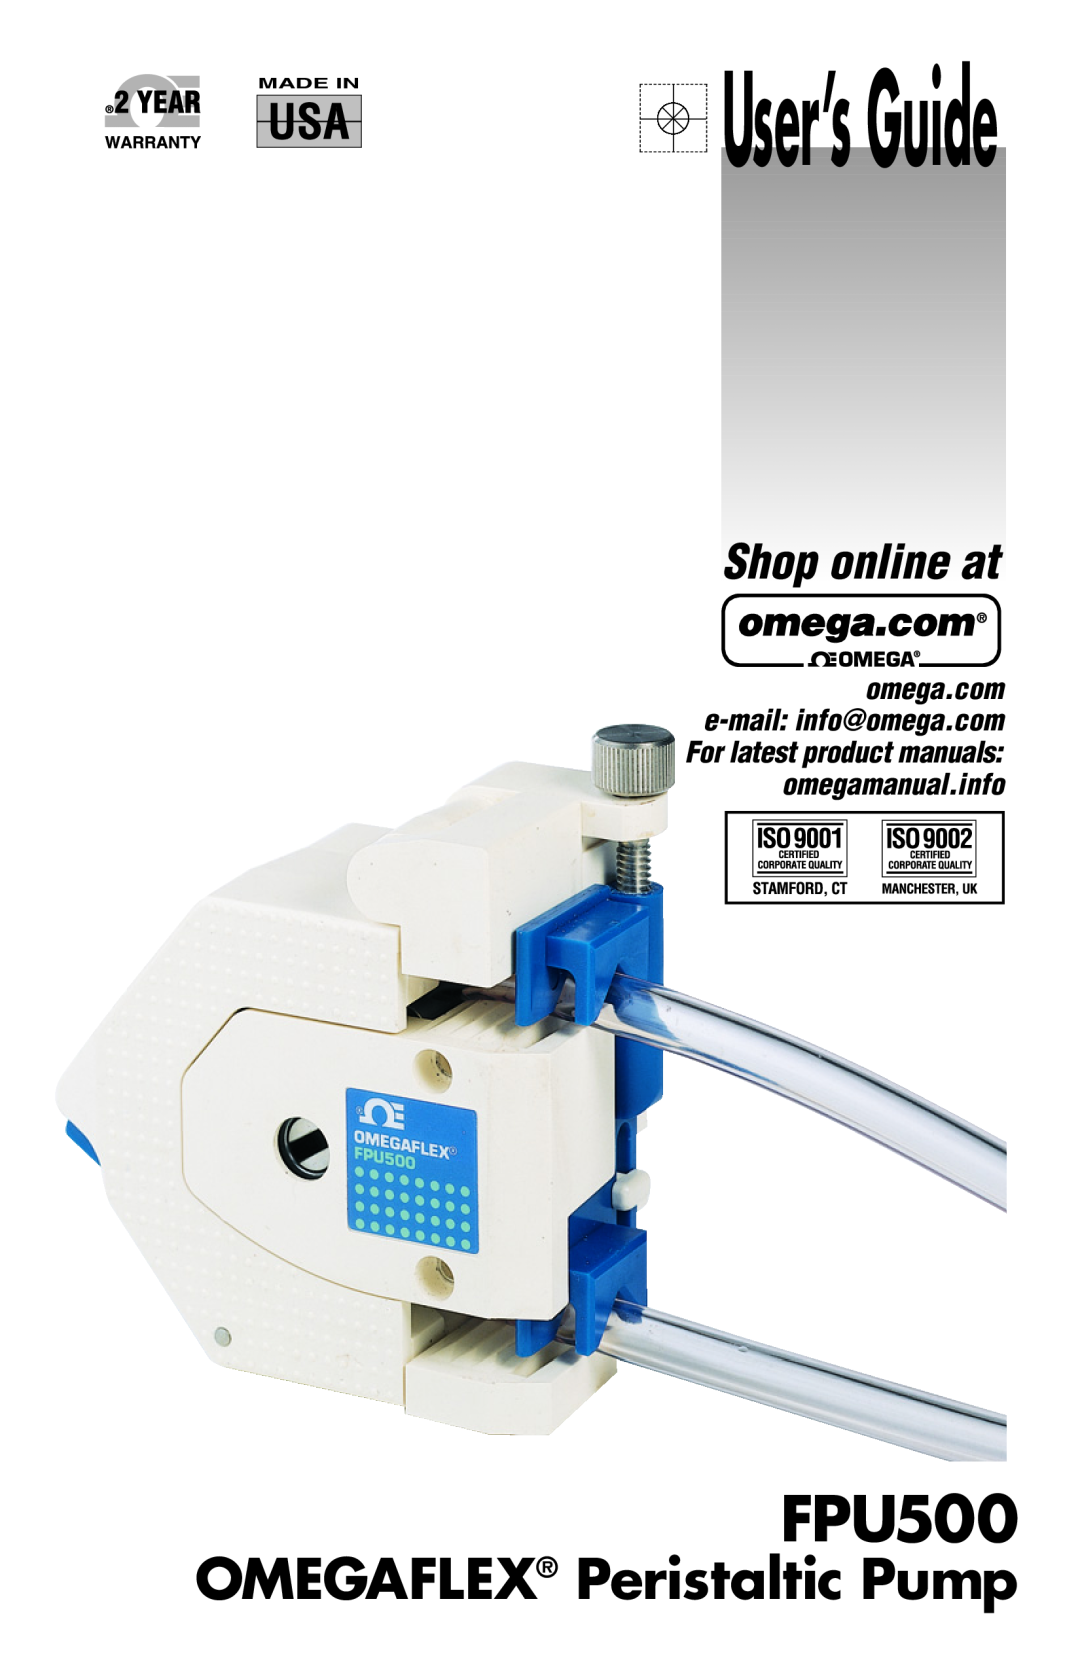 Omega Vehicle Security FPU500 manual User’s Guide, OMEGAFLEX Peristaltic Pump, Shop online at, Made In 